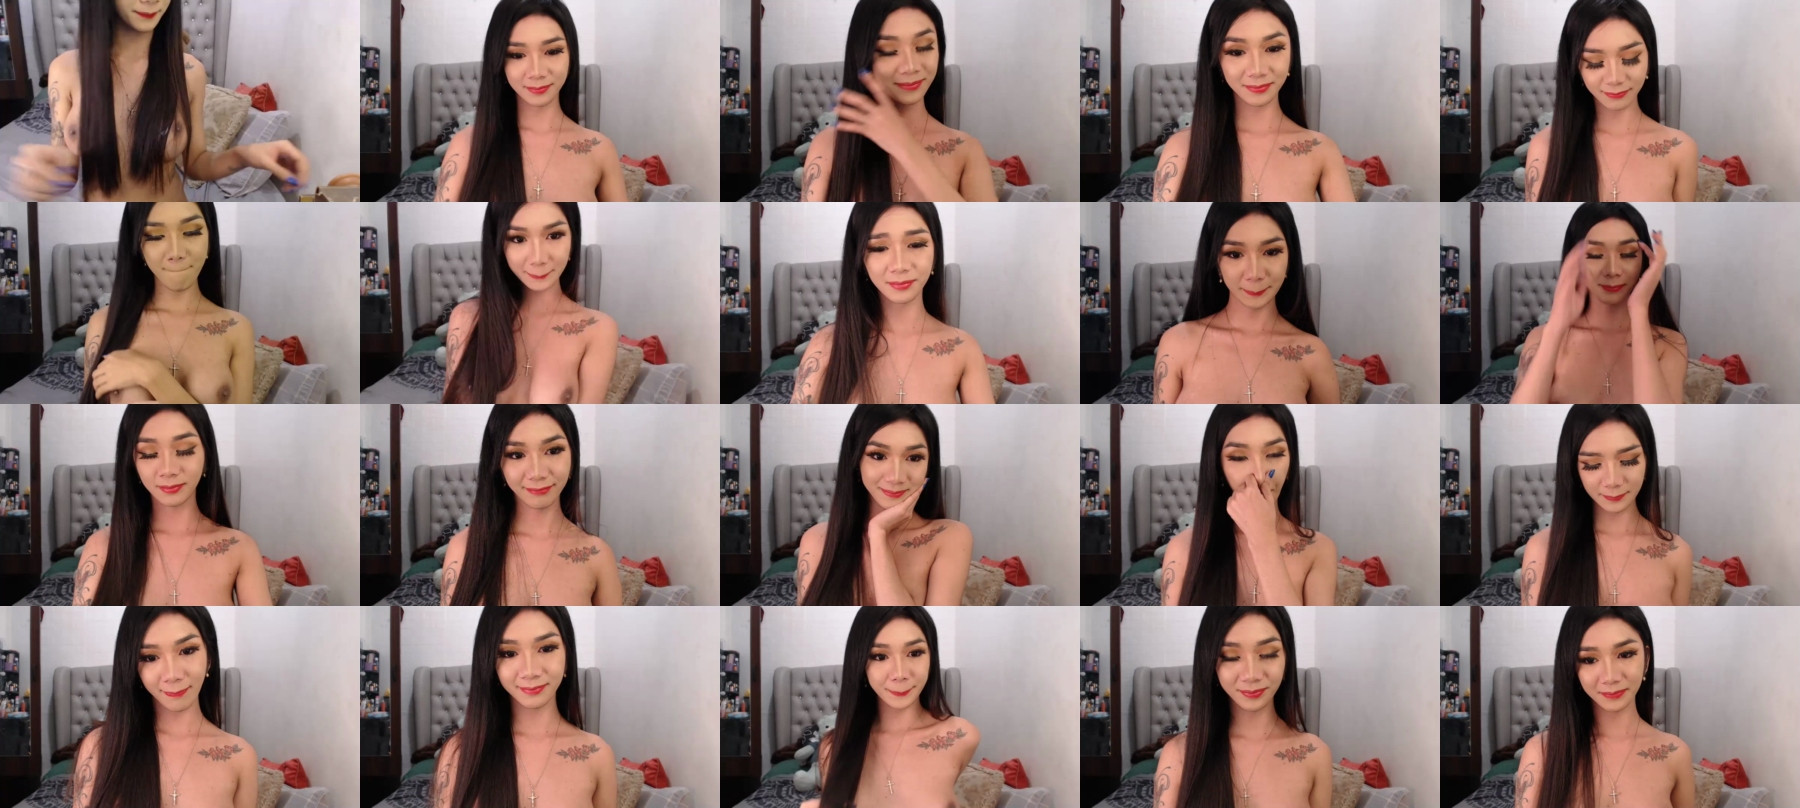 Lily_Cums01  05-04-2021 Trans Naked